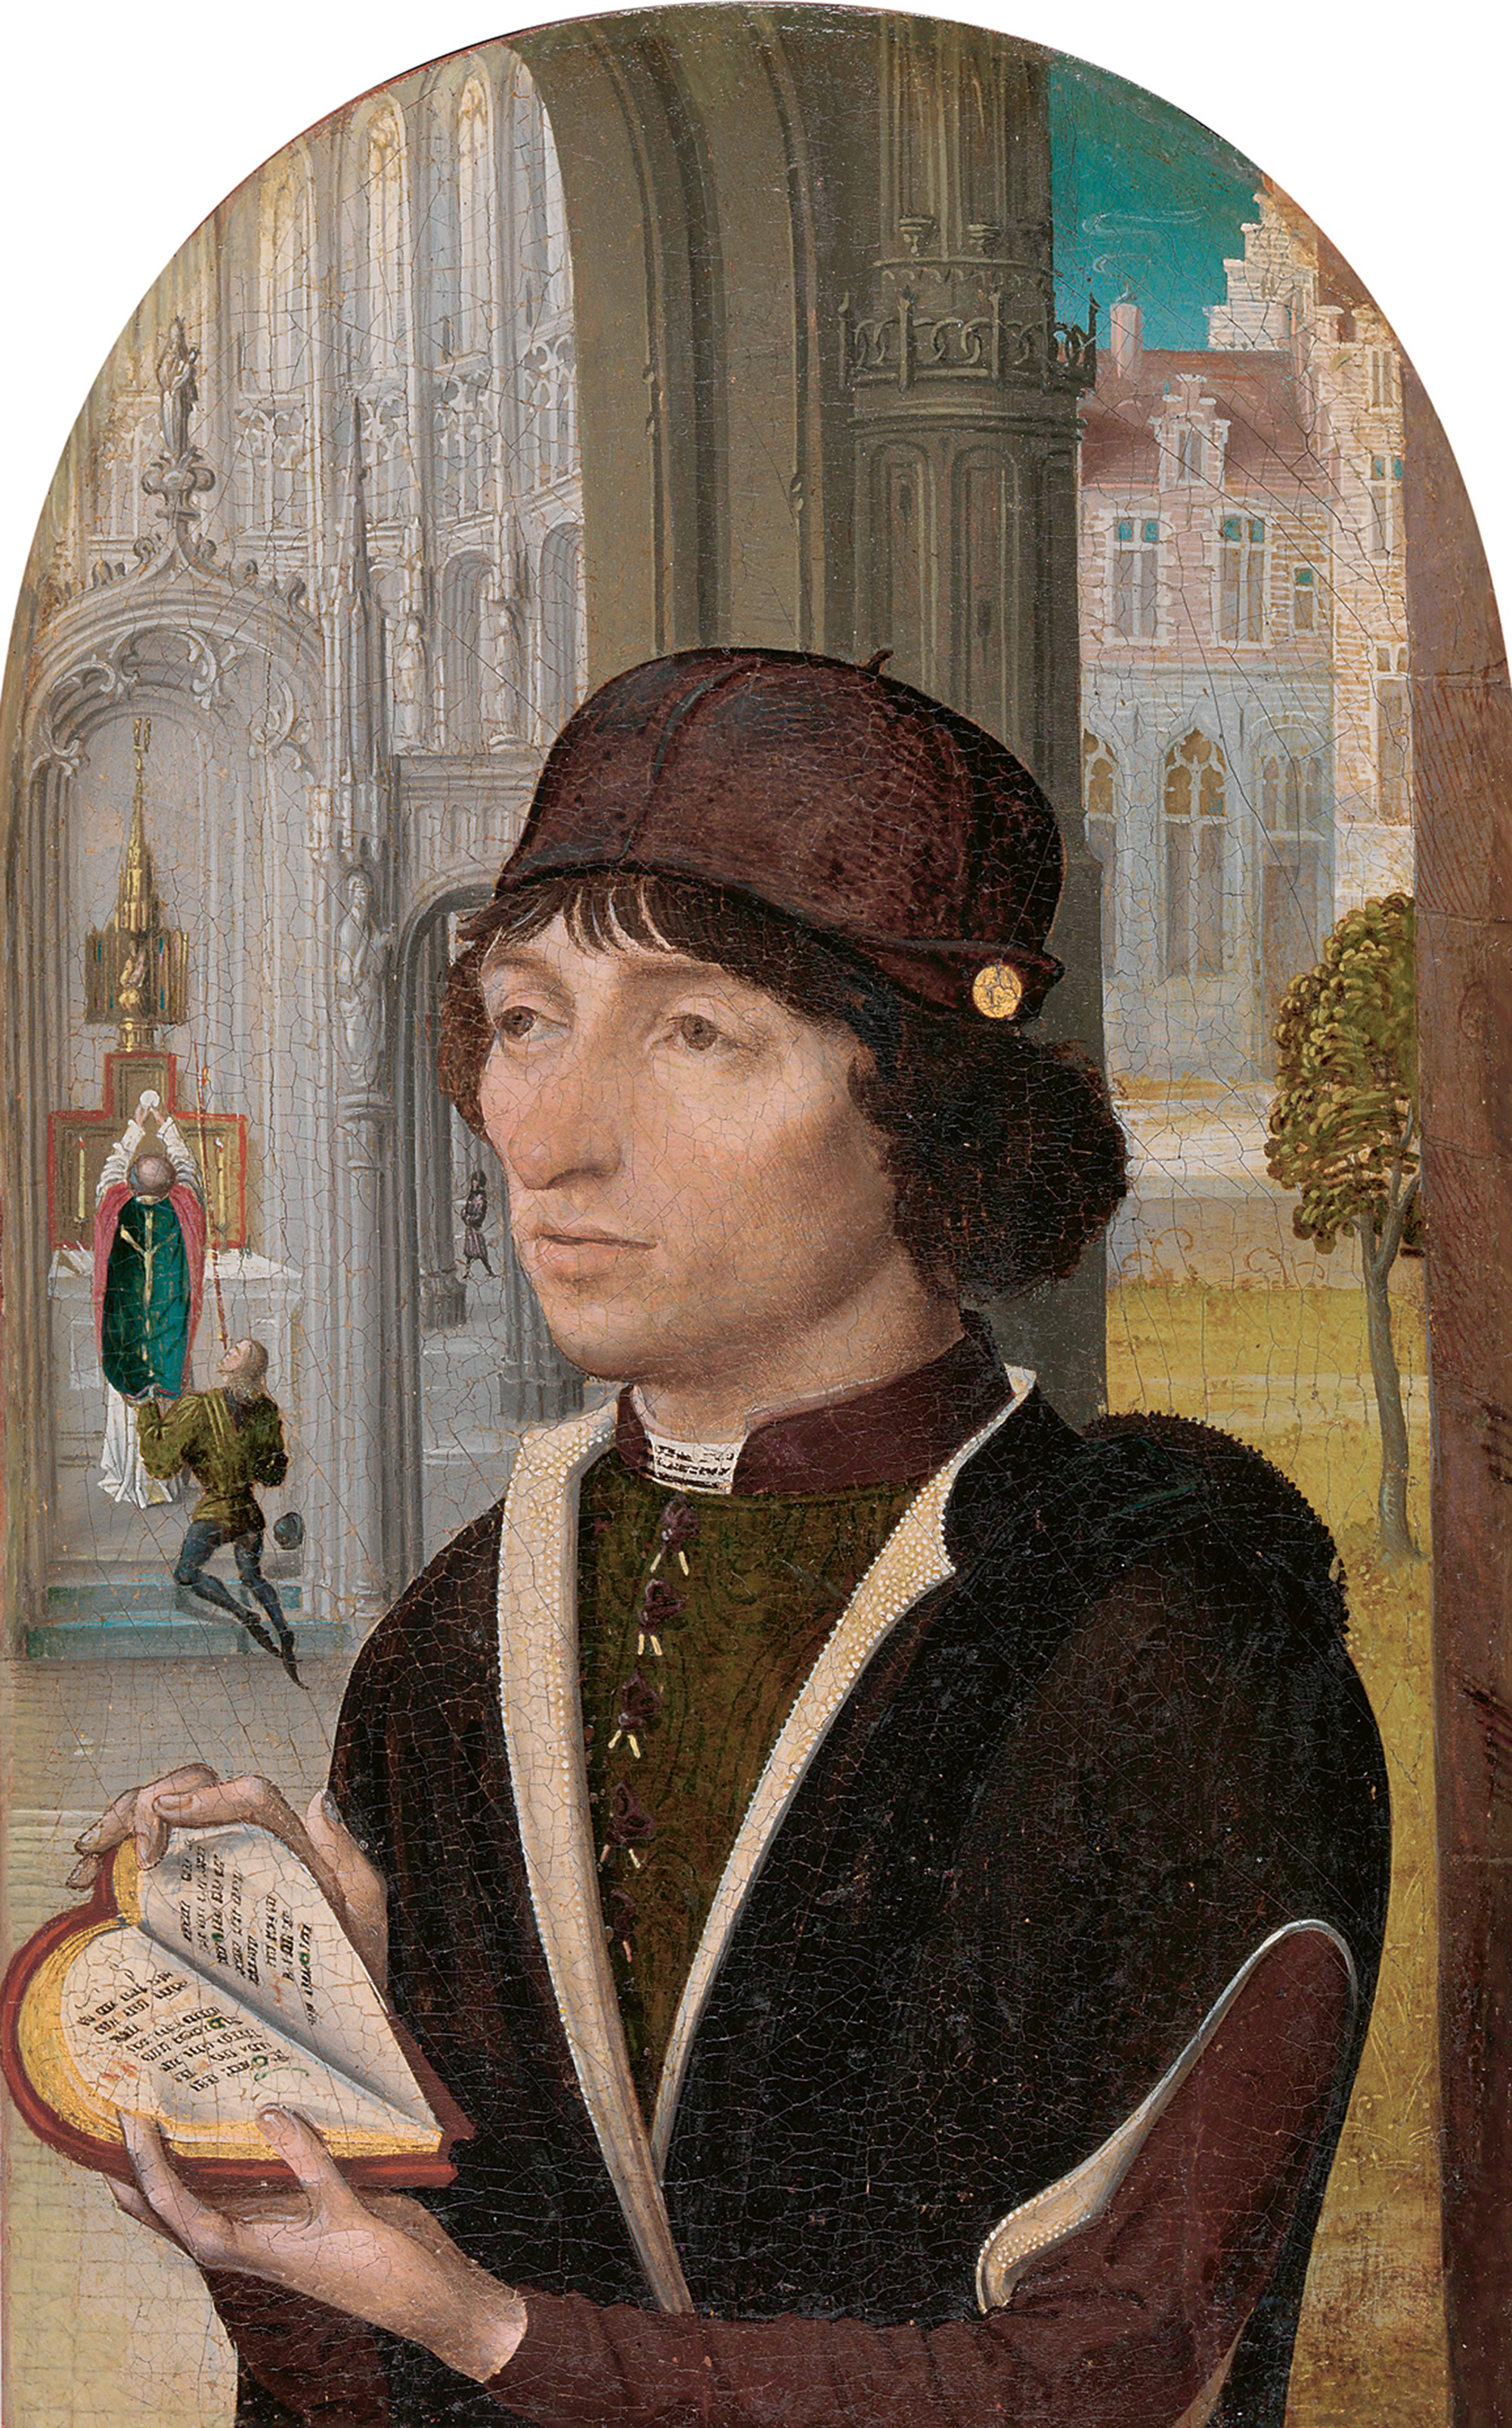 A circa fourteen eighty painting by the Master of the View of Sainte Gudule, titled “Young Man Holding a Book.” The book at hand is notably heart-shaped when opened.